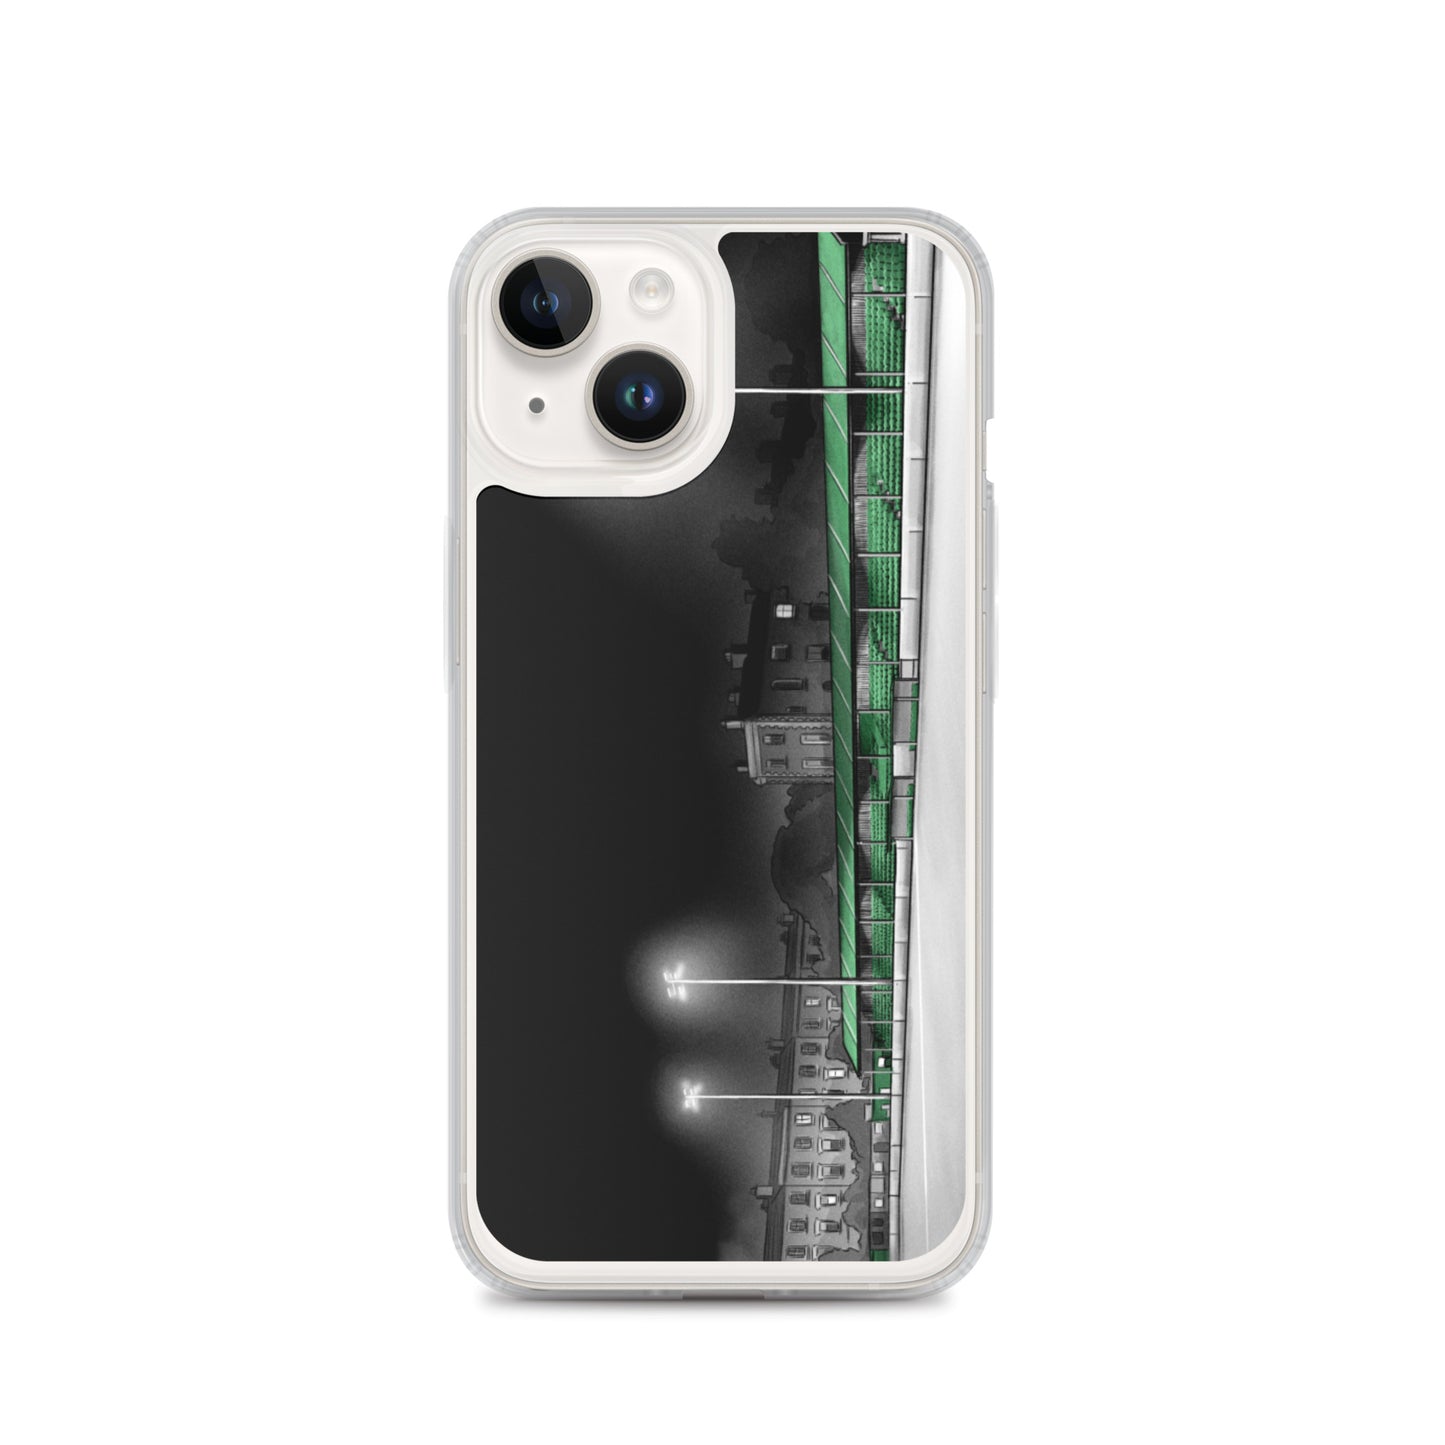 The Carlisle Grounds Bray Wanderers iPhone Case